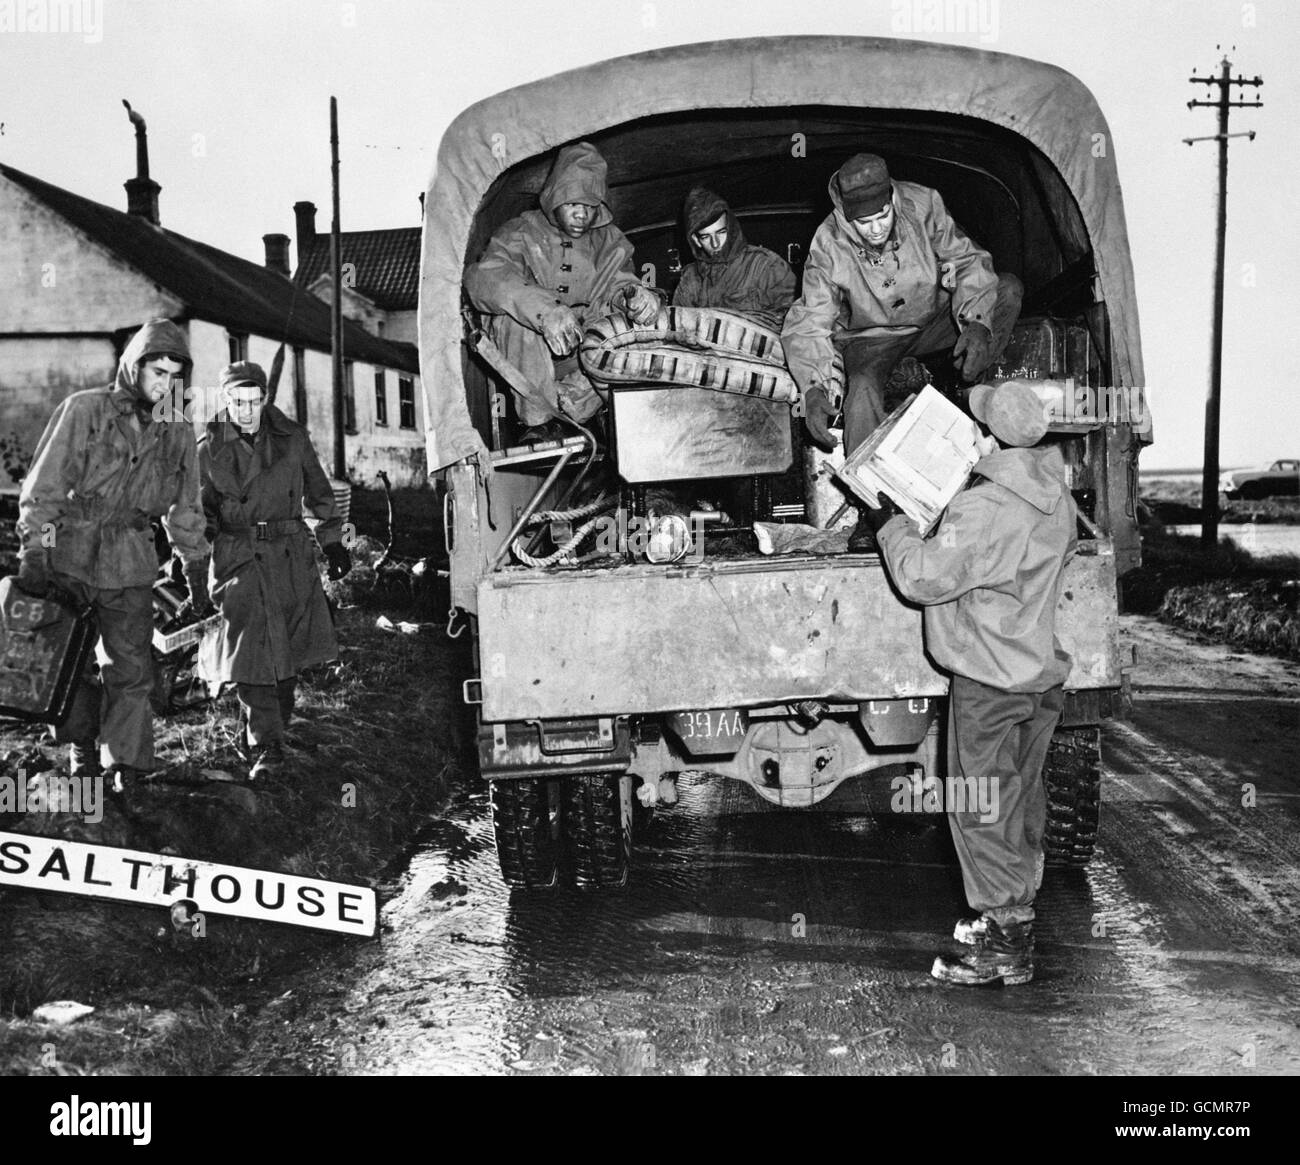 U.S servicemen from nearby Langham Camp help in salvage work at Salthouse, Norfolk, where furniture and other household goods were strewn all over the village in the east coast storm and flood disaster. Stock Photo